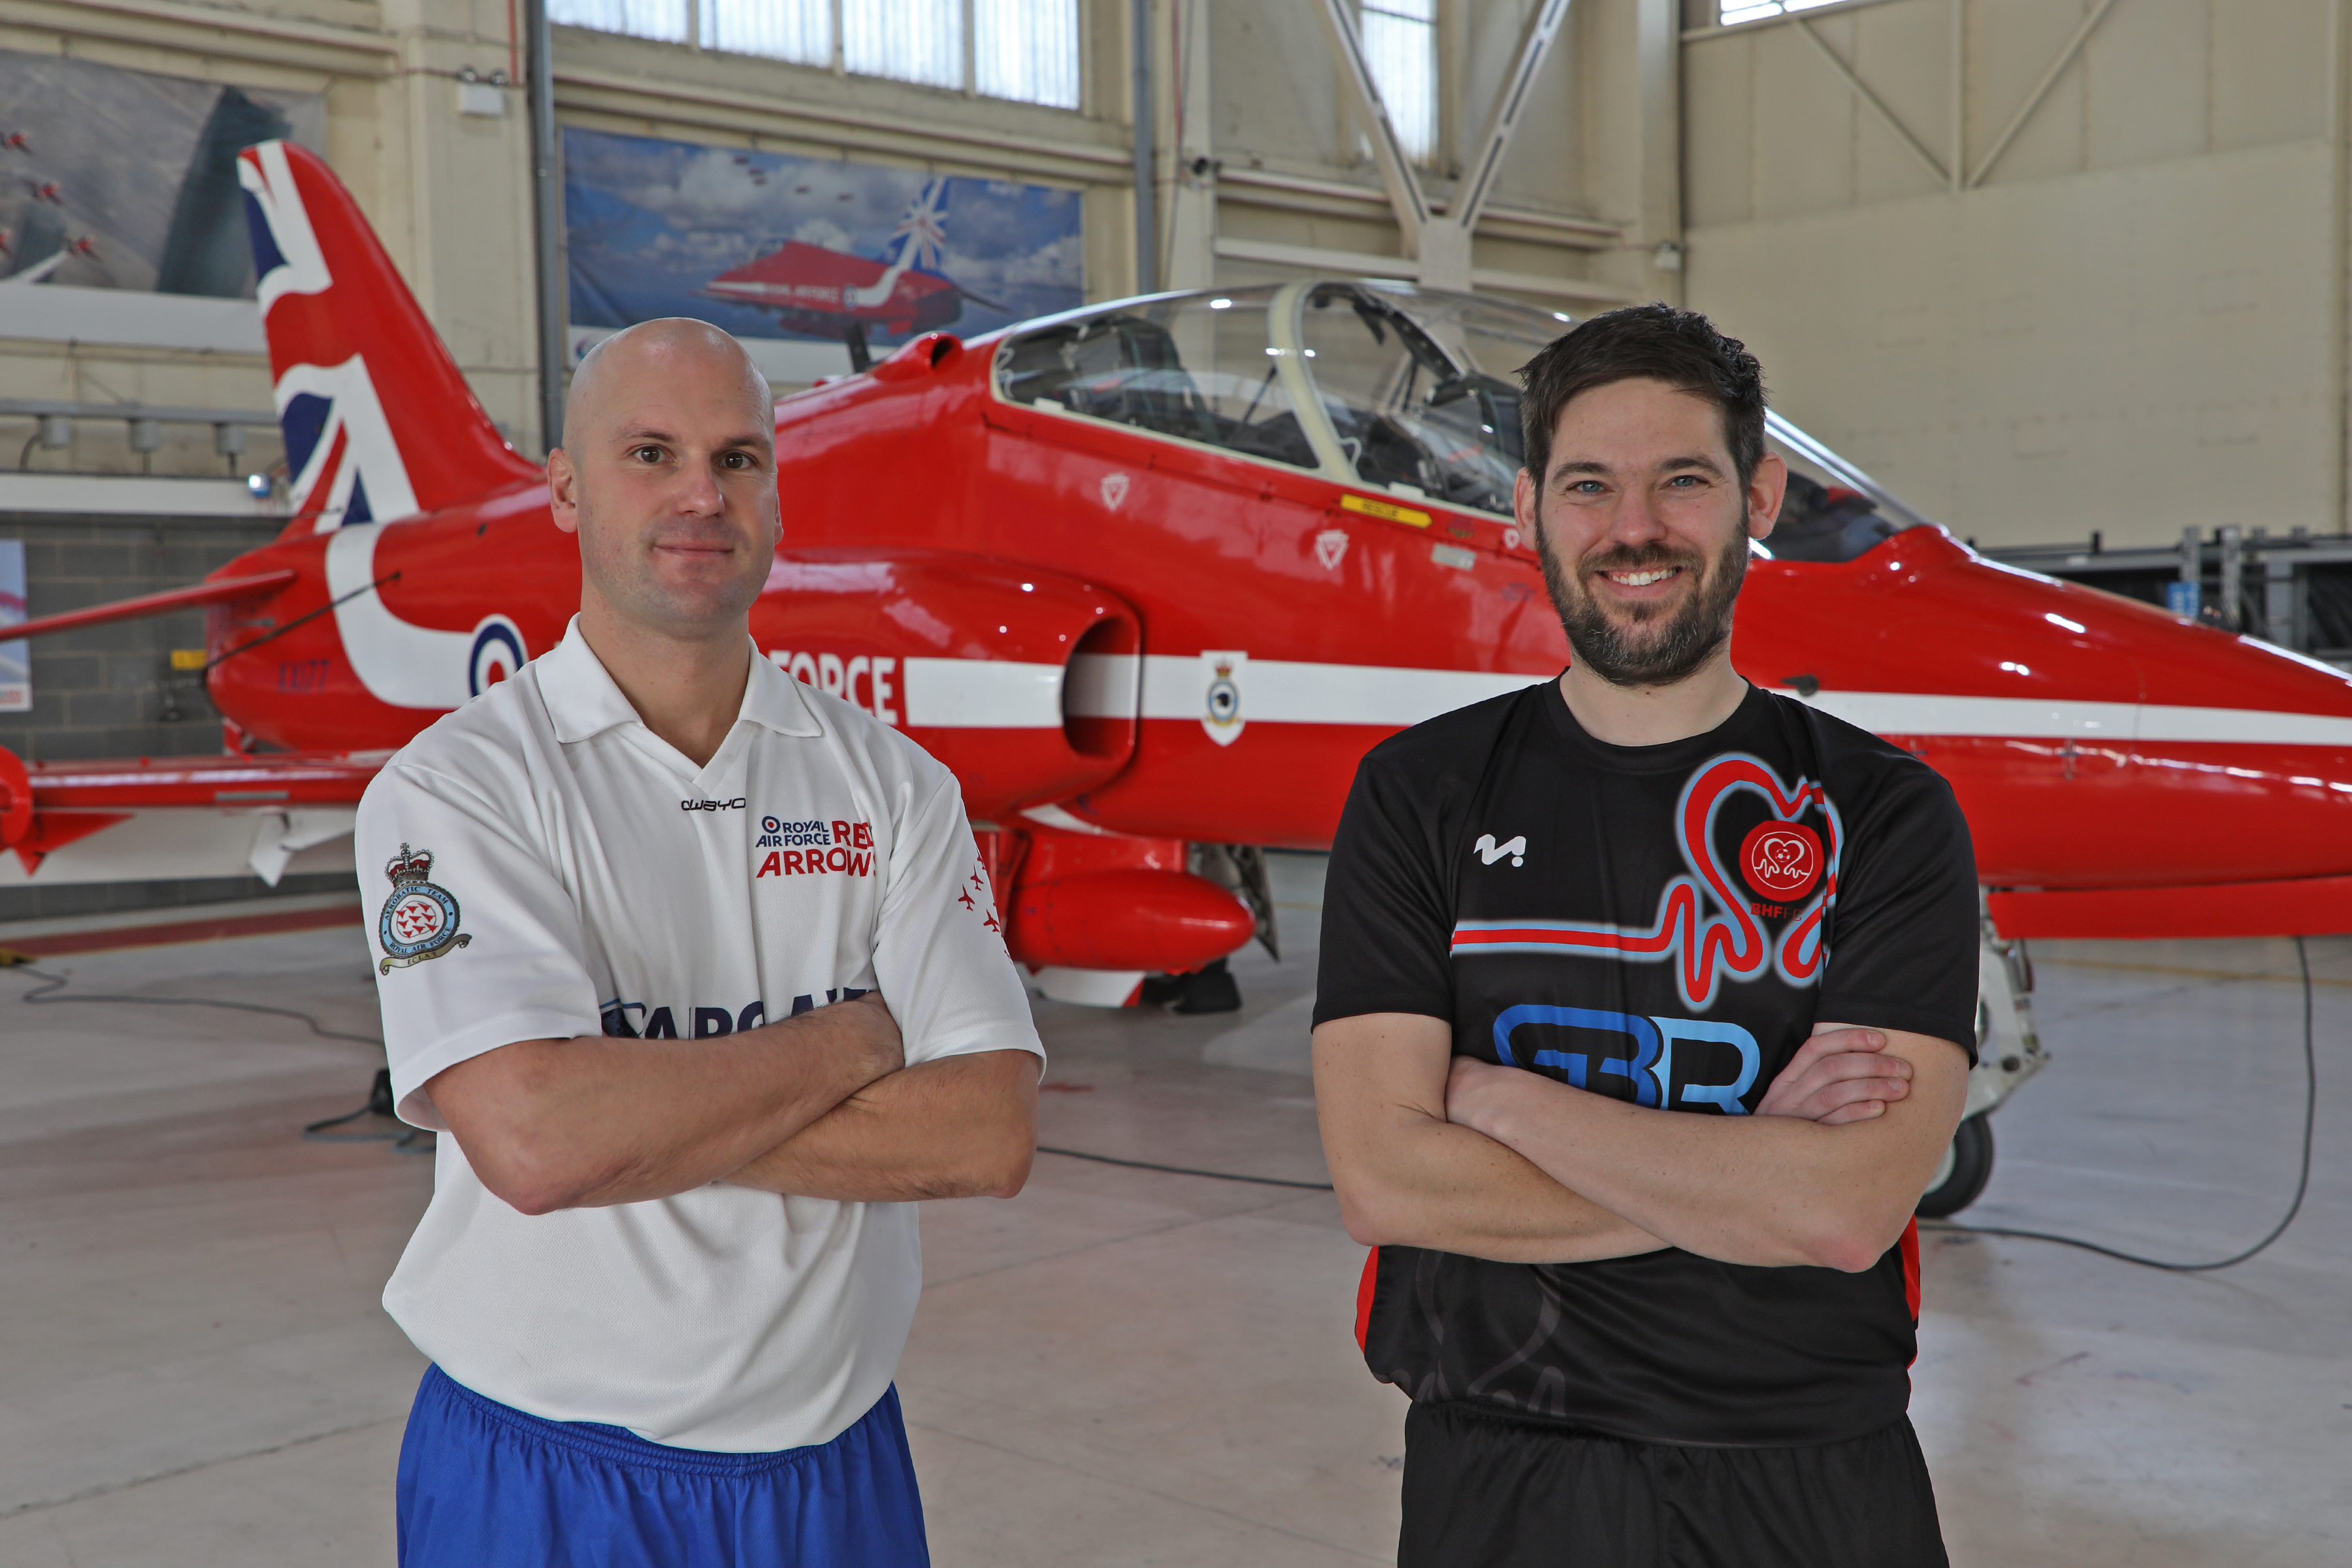 Manager of the Red Arrows XI, Sergeant David Marshall (left), with BHF FC's Gary Burr